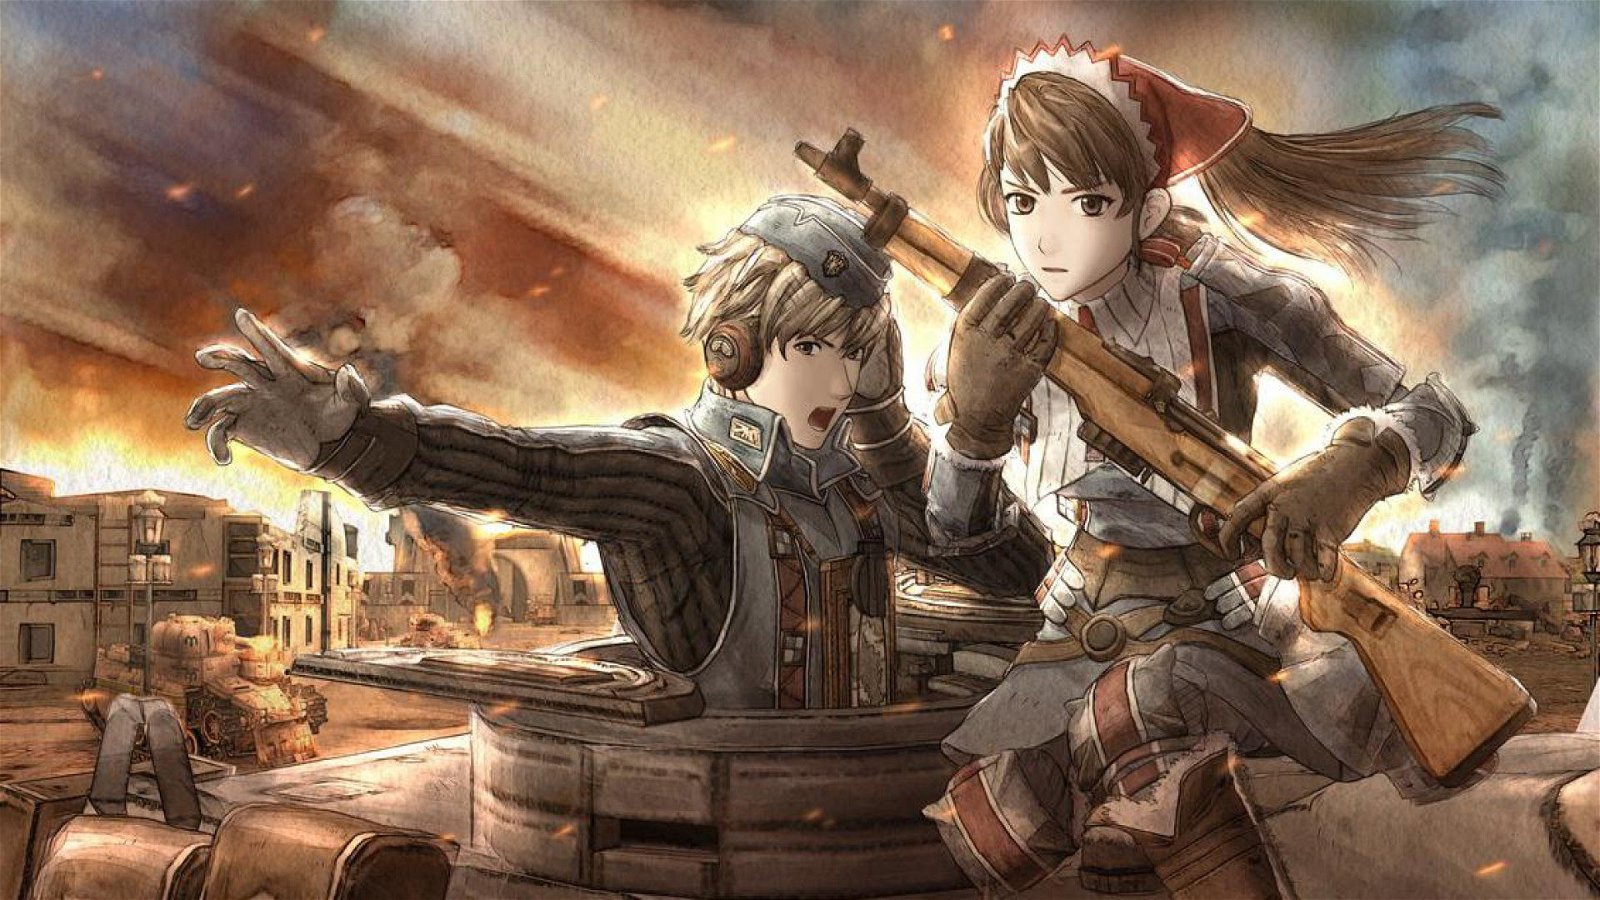 Valkyria Chronicles Remastered Officially Hitting PS4 in NA and Europe - 2016-01-25 10:09:40